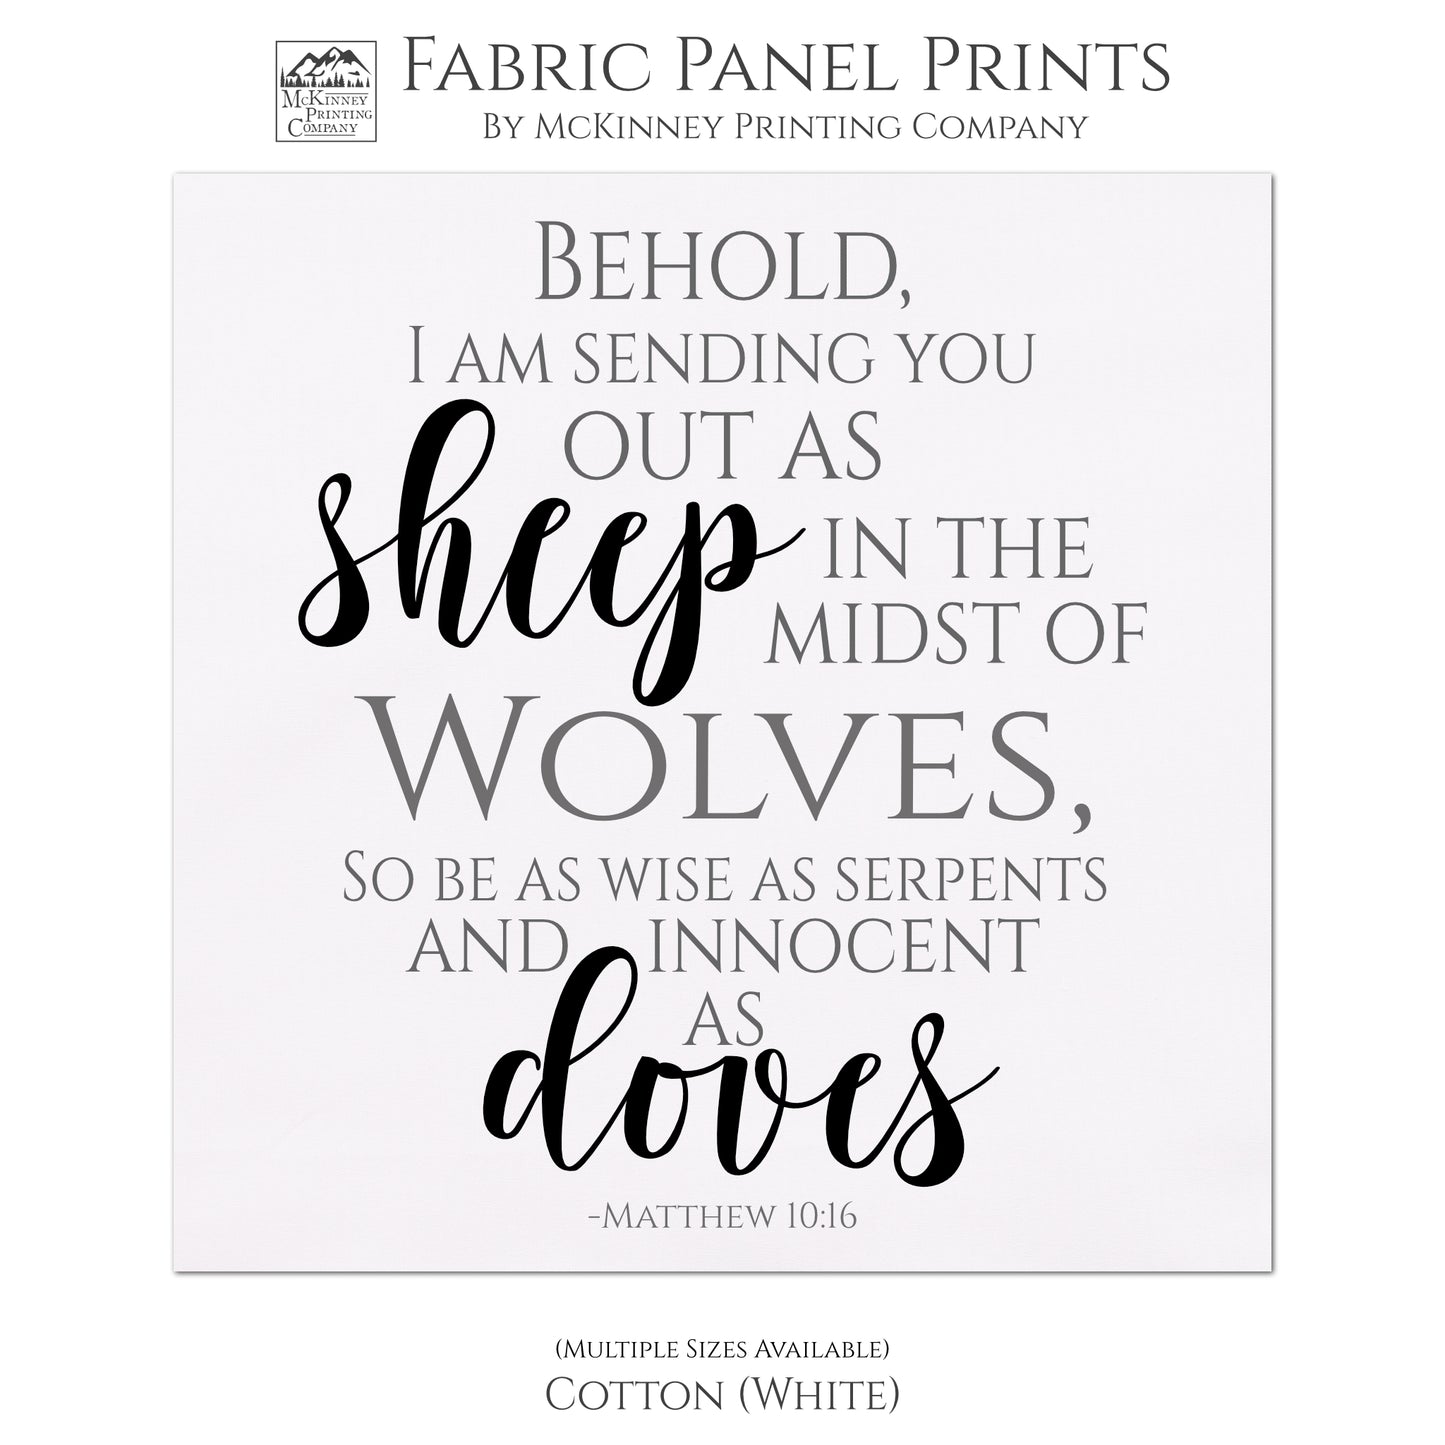 Behold, I am sending you out as sheep in the midst of wolves, so be as wise as serpents and innocent as doves. - Matthew 10 16, Bible Verse Wall Art, Scripture Fabric, Religious Fabric, Quilt Block - Cotton, White